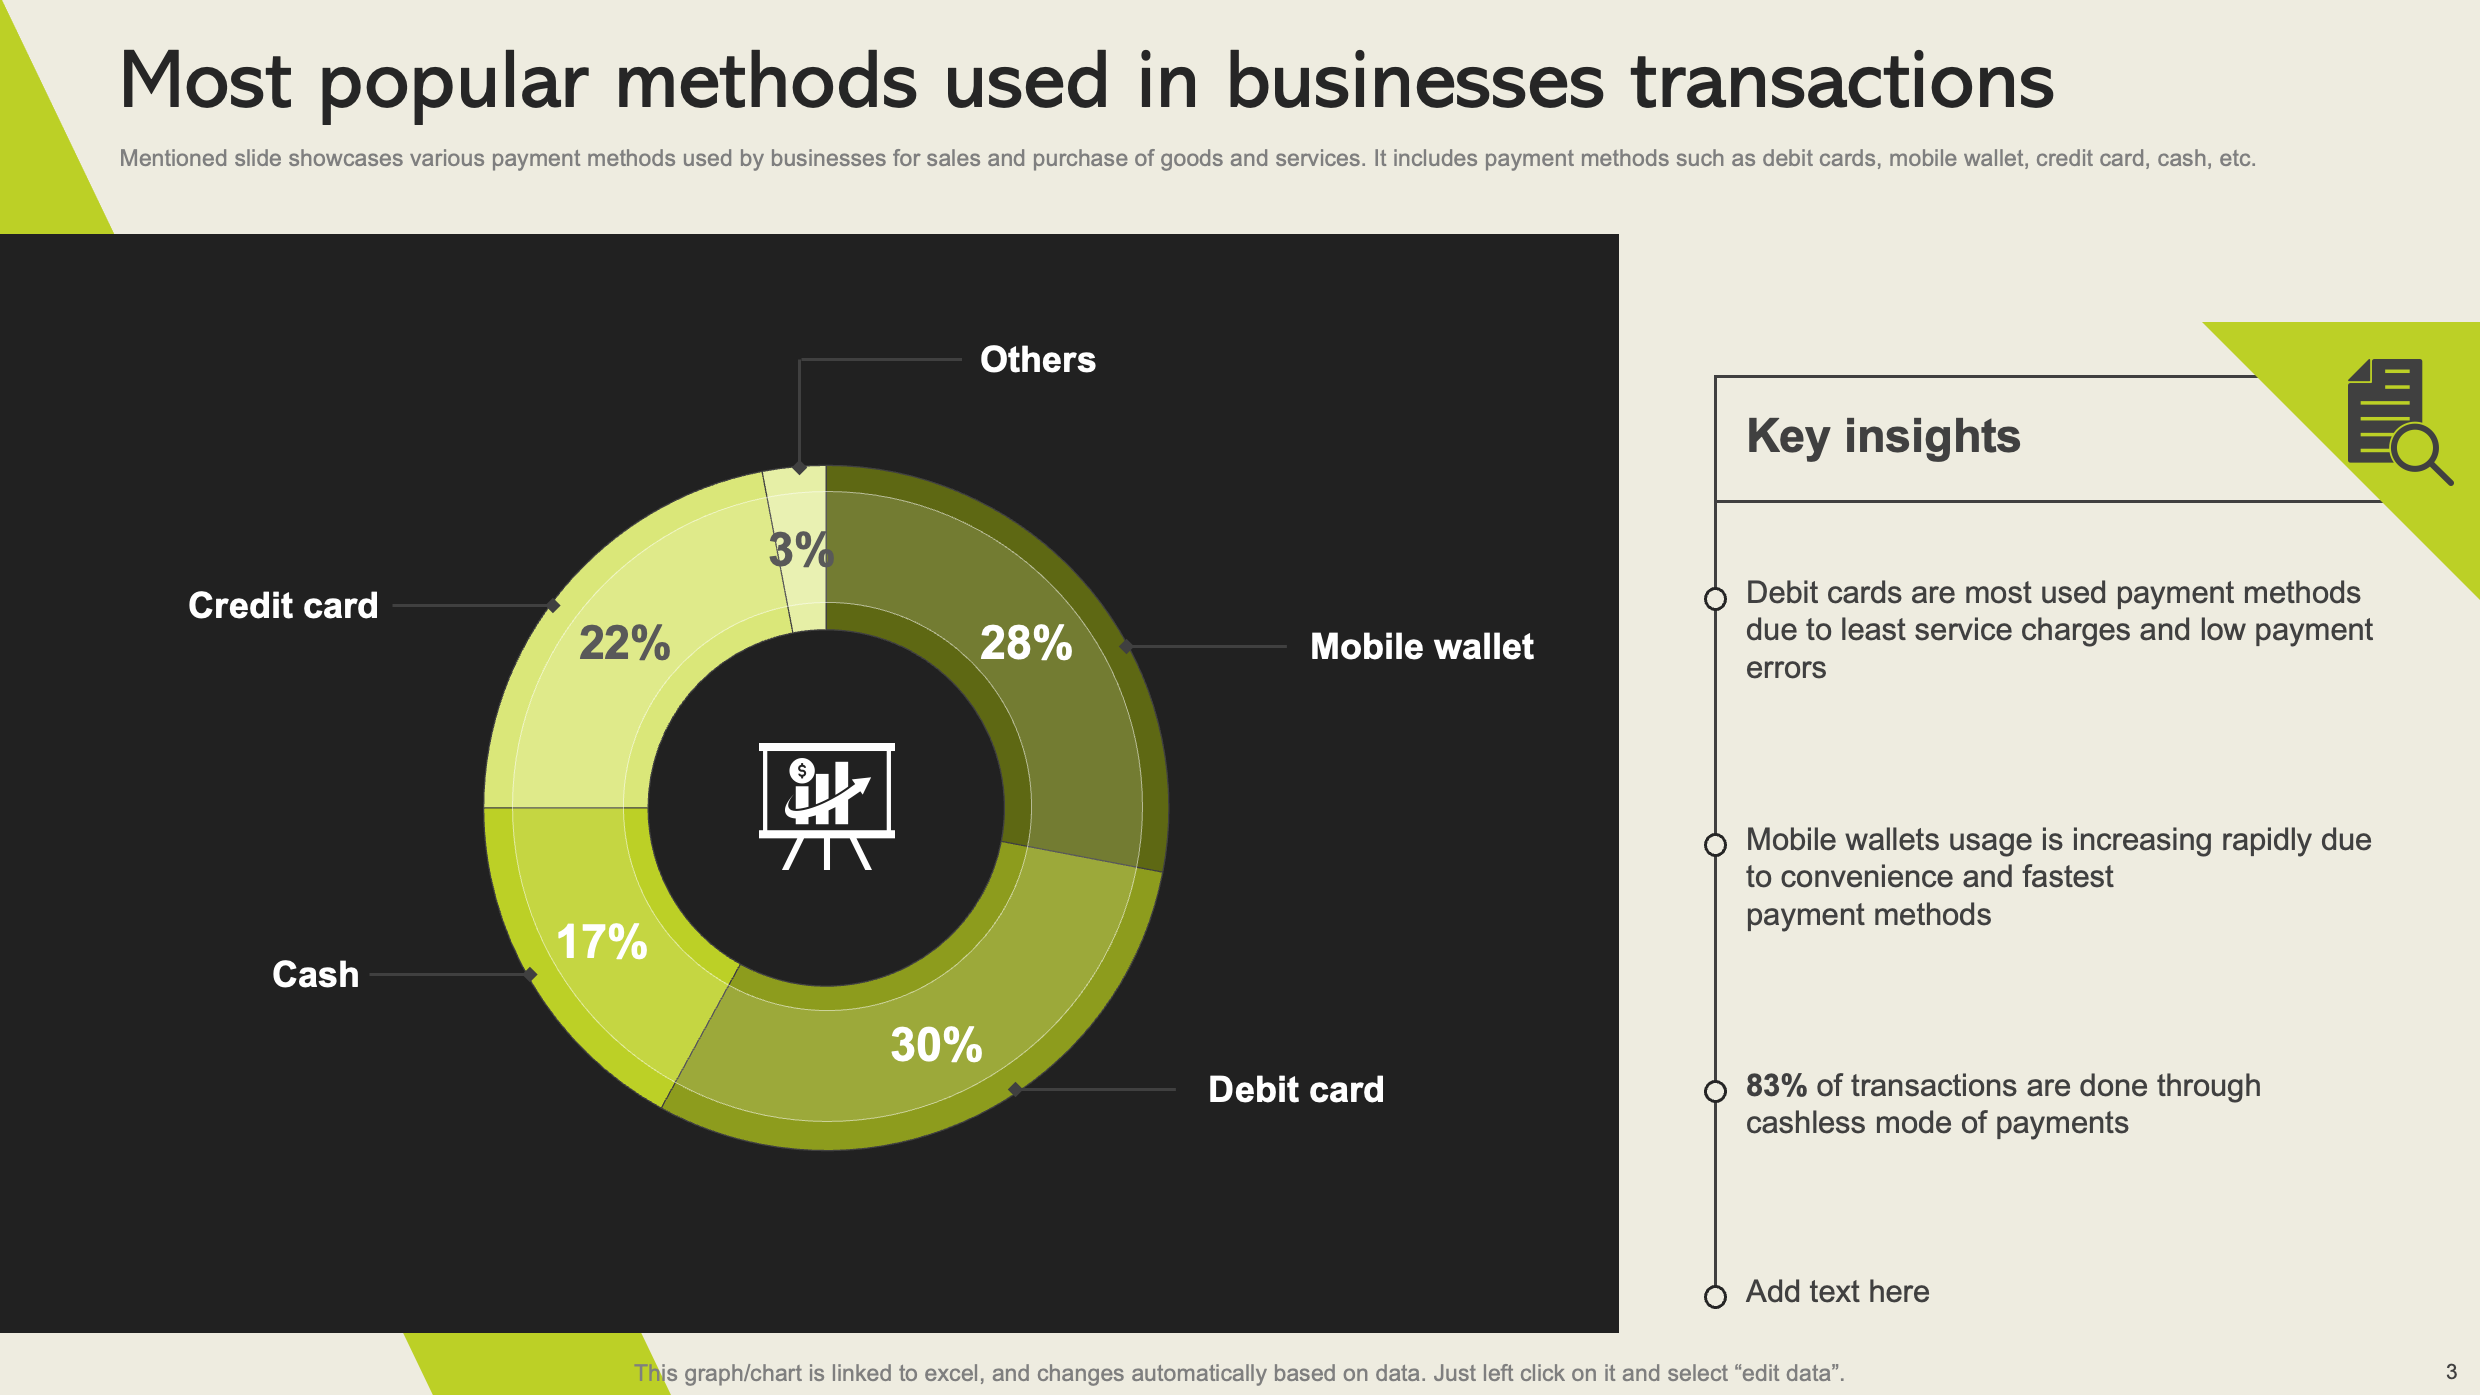 Cashless Payment Adoption to Increase Business Sales